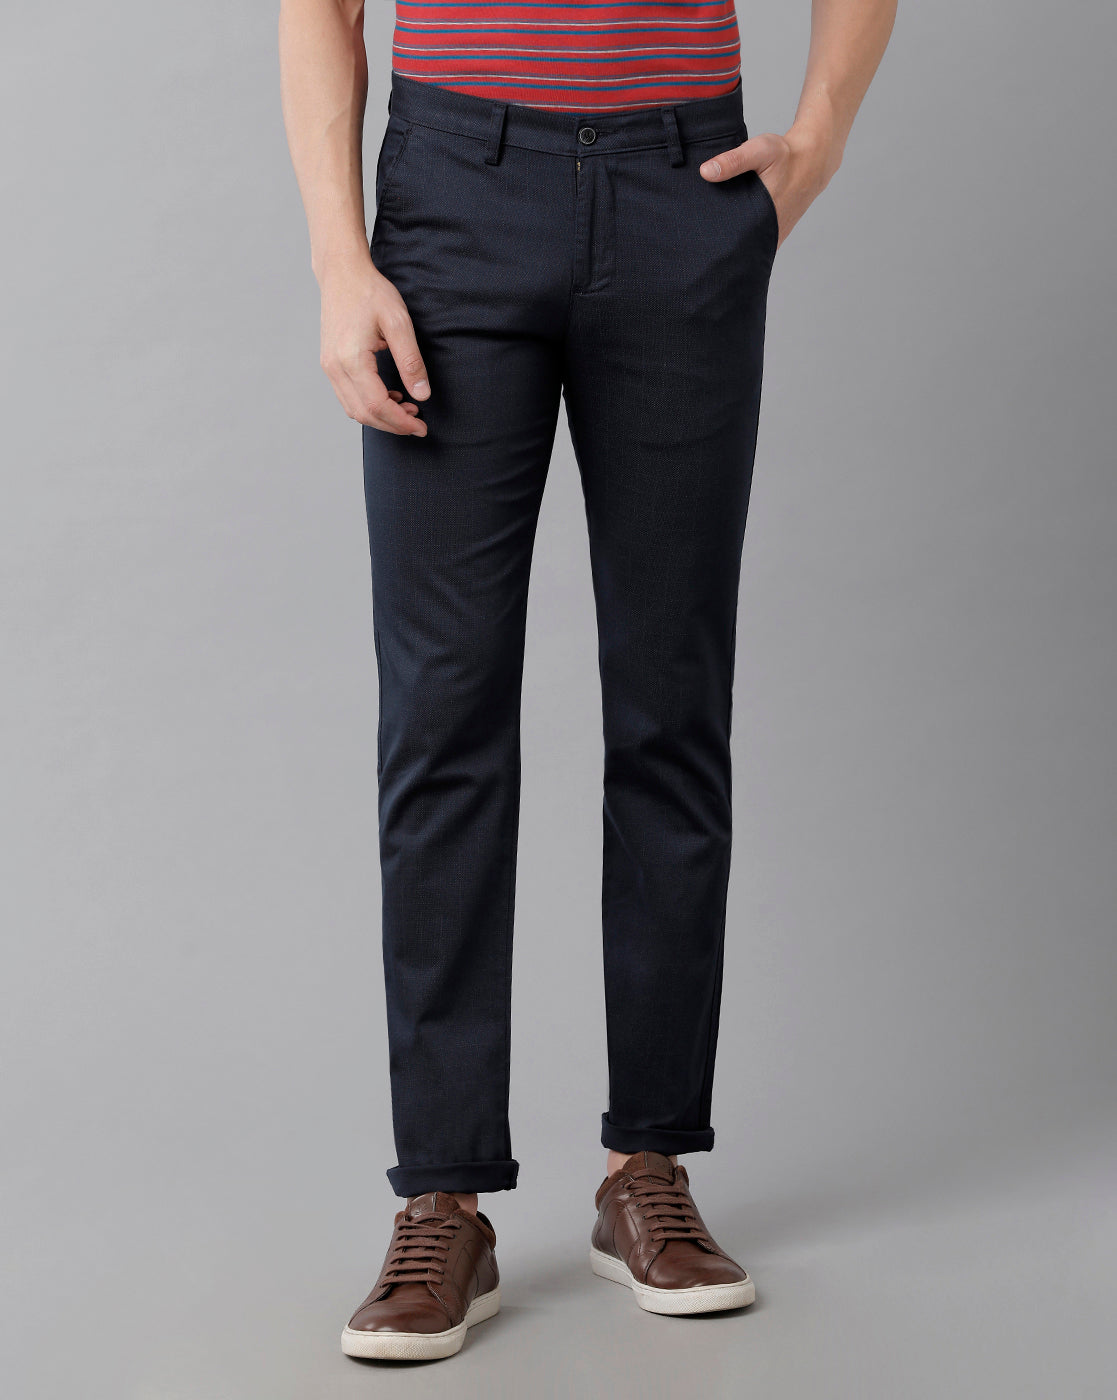 Navy Blue Baggy Cropped Pant - Arhams Online Fashion Store